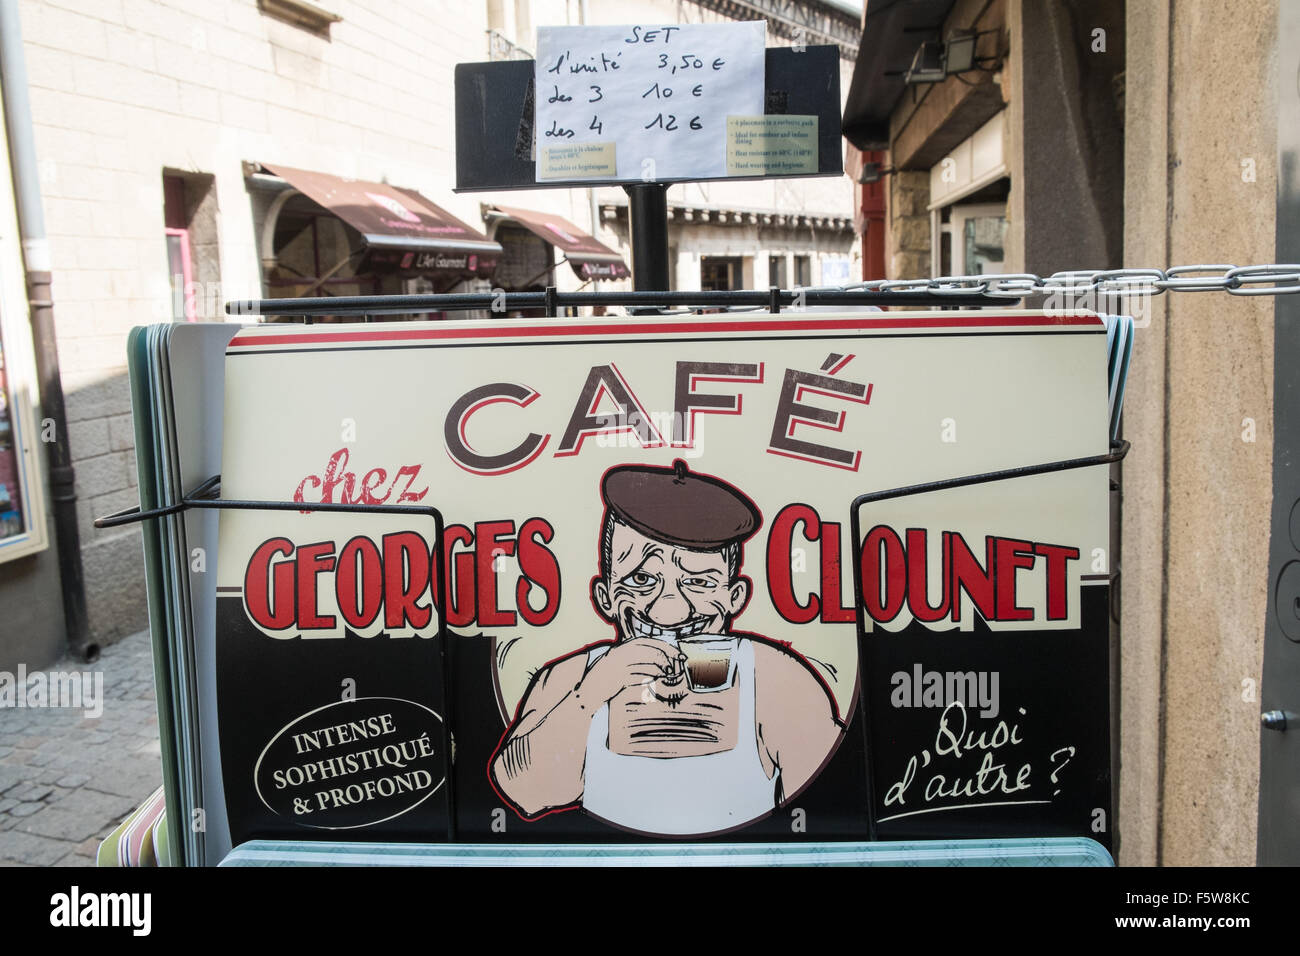 Cafe Georges Clounet, a play on words of famous Holywood actor George Clooney,metal sign within touristy Carcassonne Cite,Aude, Stock Photo